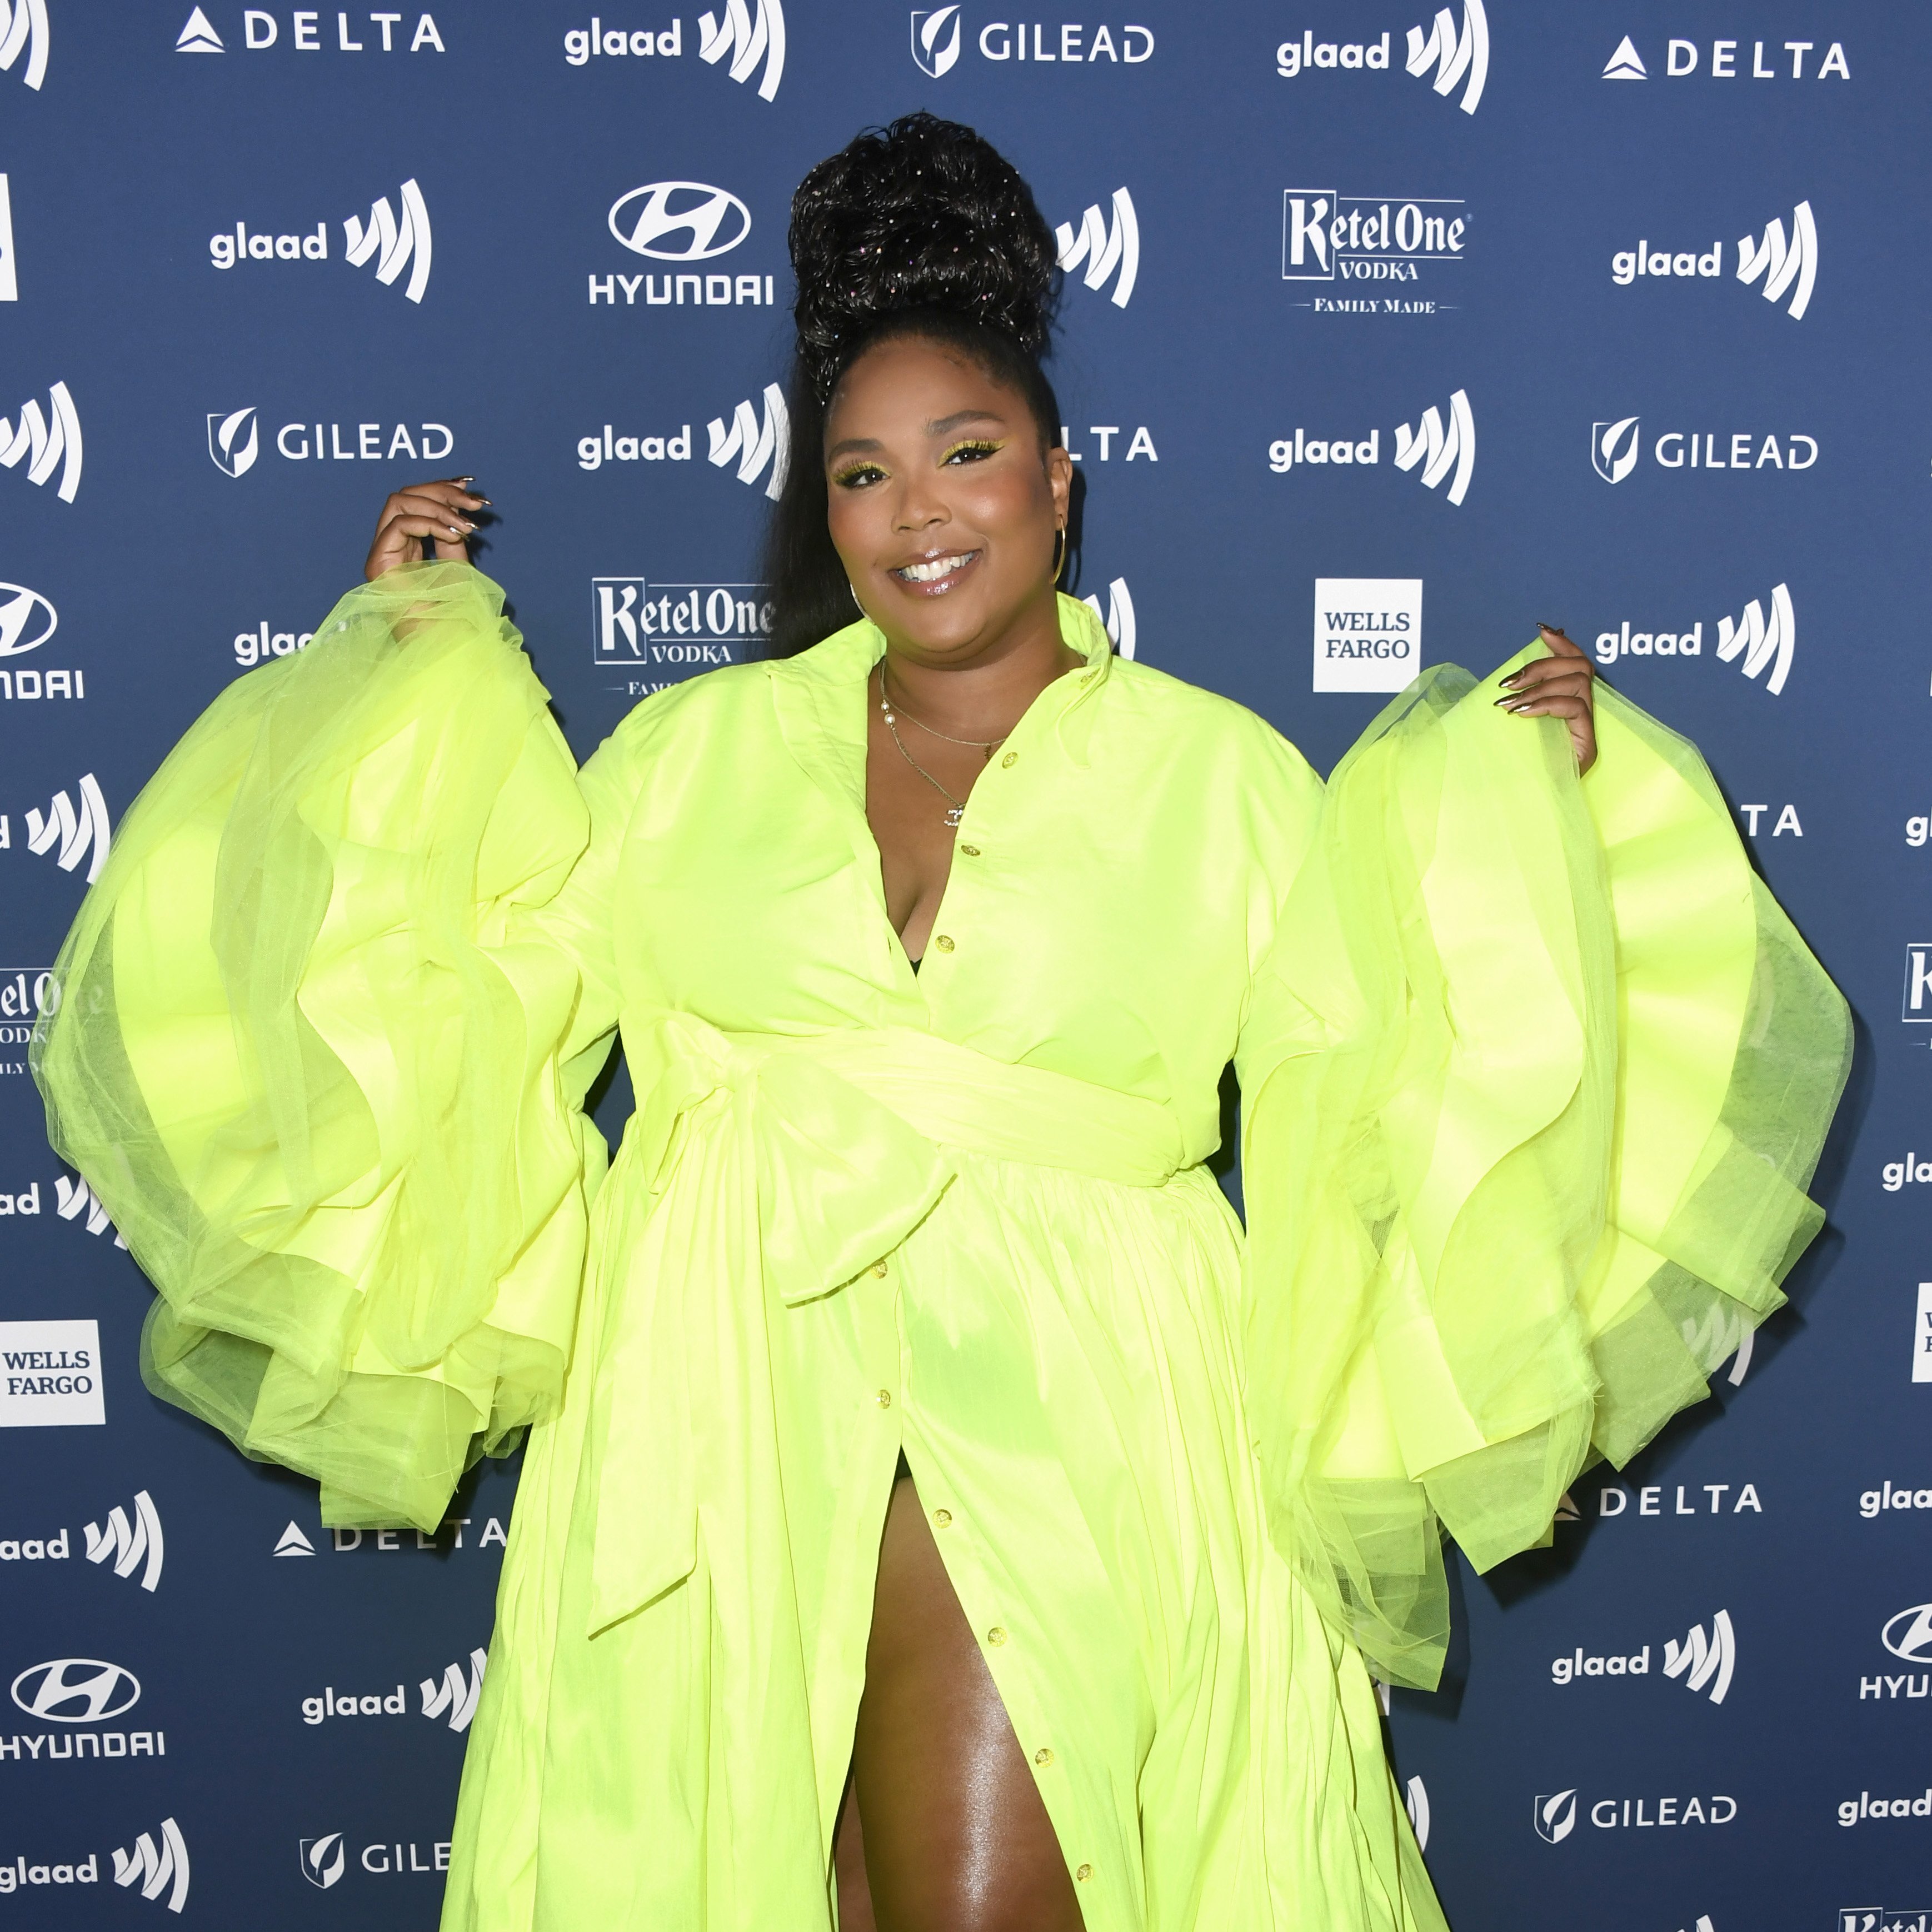  Lizzo attends the 30th Annual GLAAD Media Awards at The Beverly Hilton Hotel on March 28, 2019| Photo: Getty Images